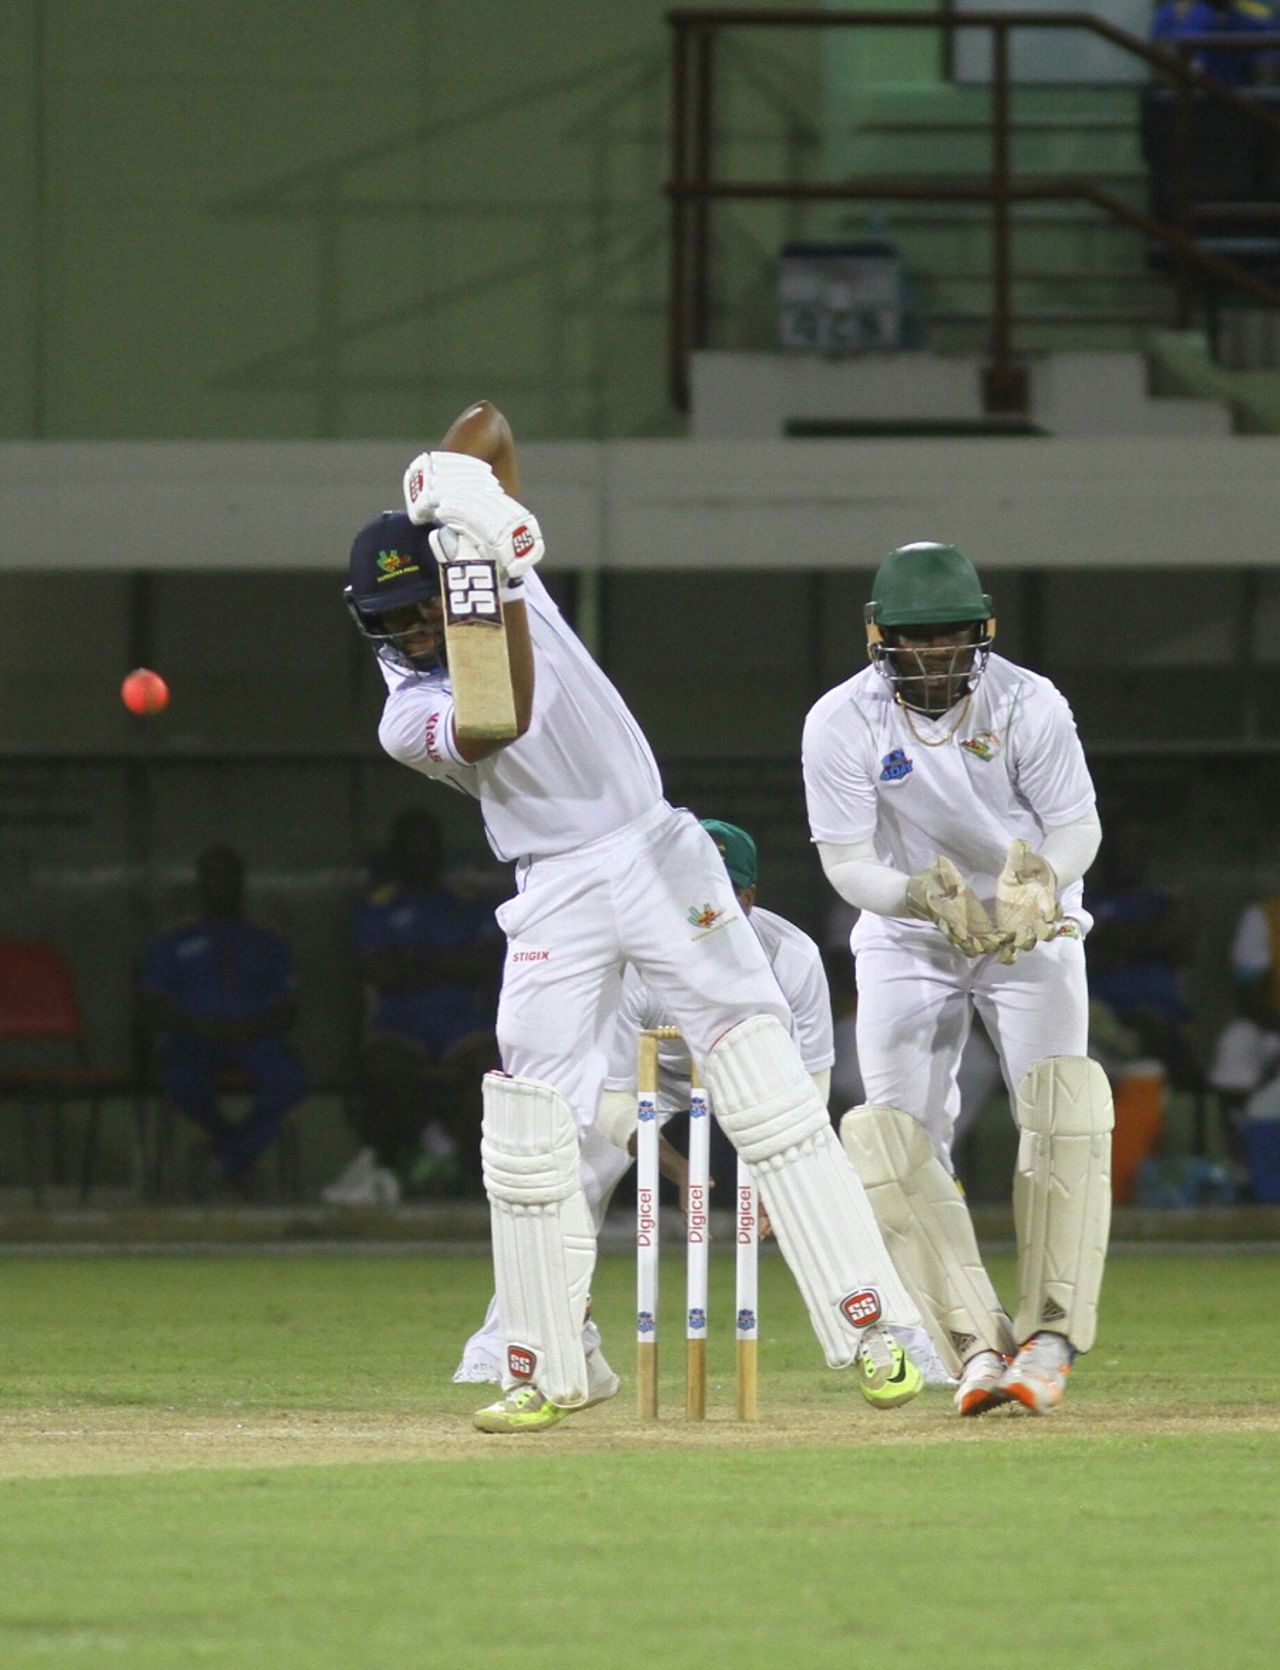 Shai Hope executes a back-foot drive, Guyana v Barbados, Regional 4 Day Tournament, day 3, Providence, December 11, 2016